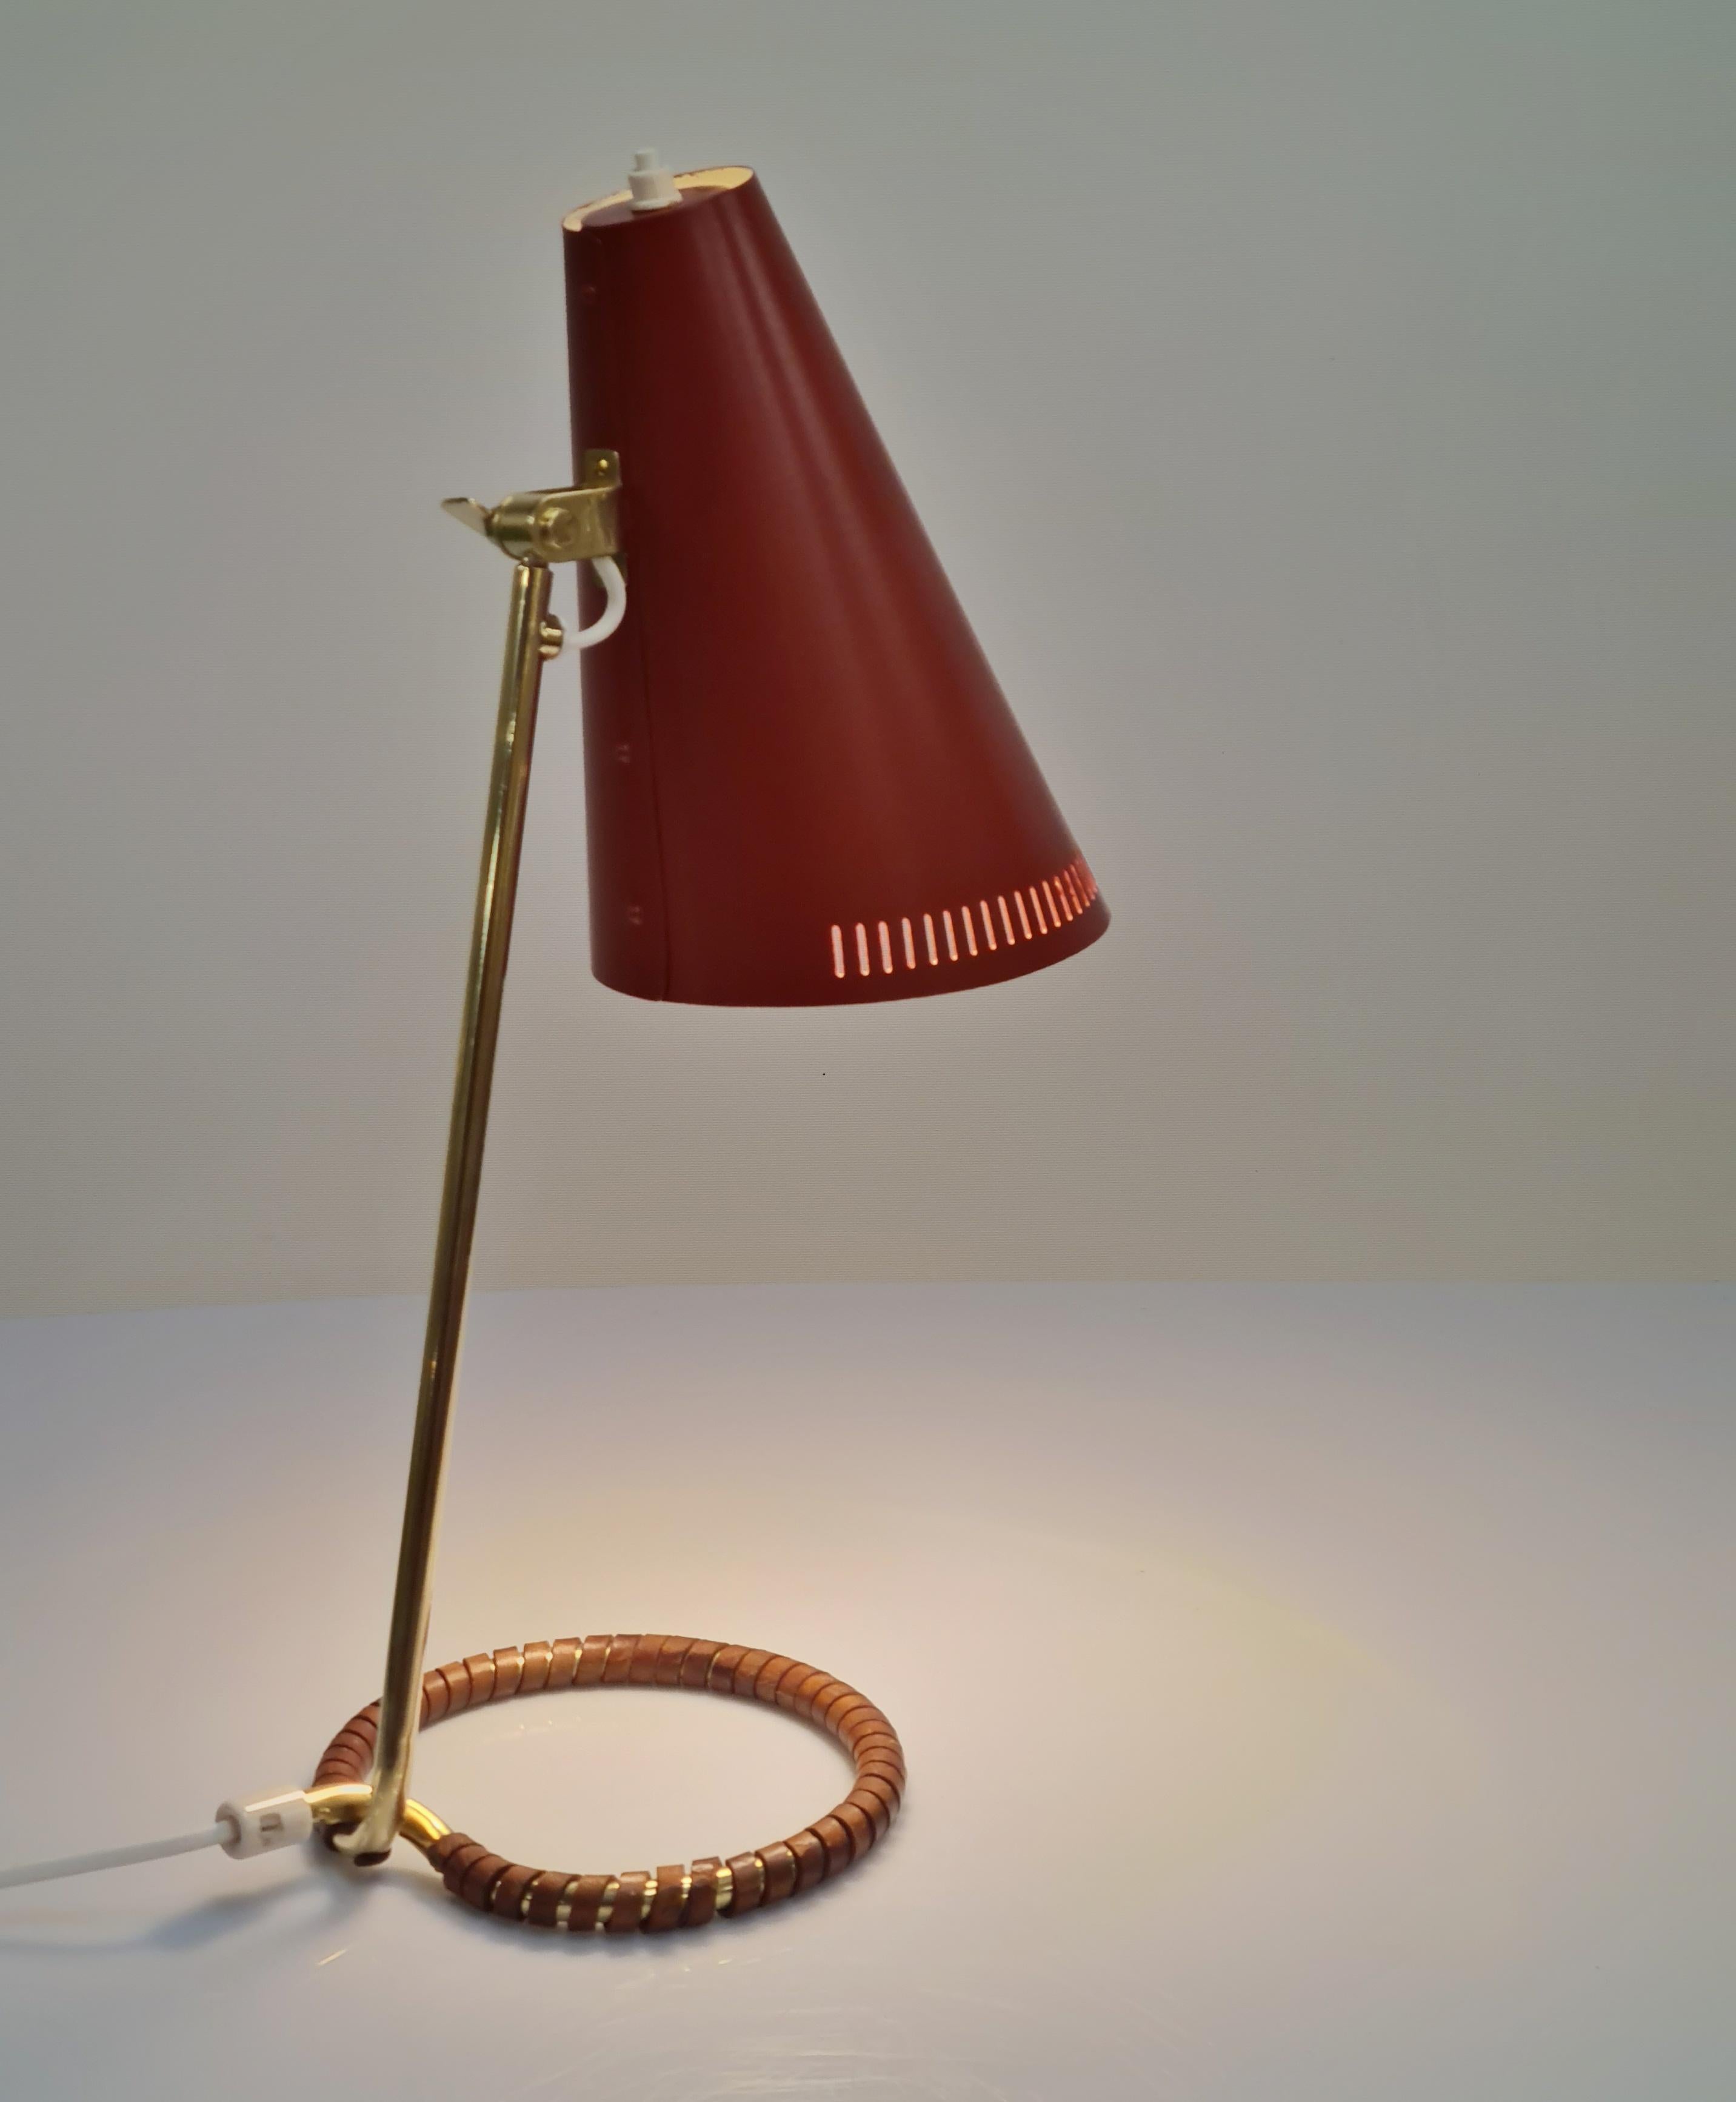 Despite the small size of this lamp the combination of brass, painted metal and leather makes it stand out. The simplified look is topped off with extra attention to quality and details. When it comes to details the leather strapping makes a perfect